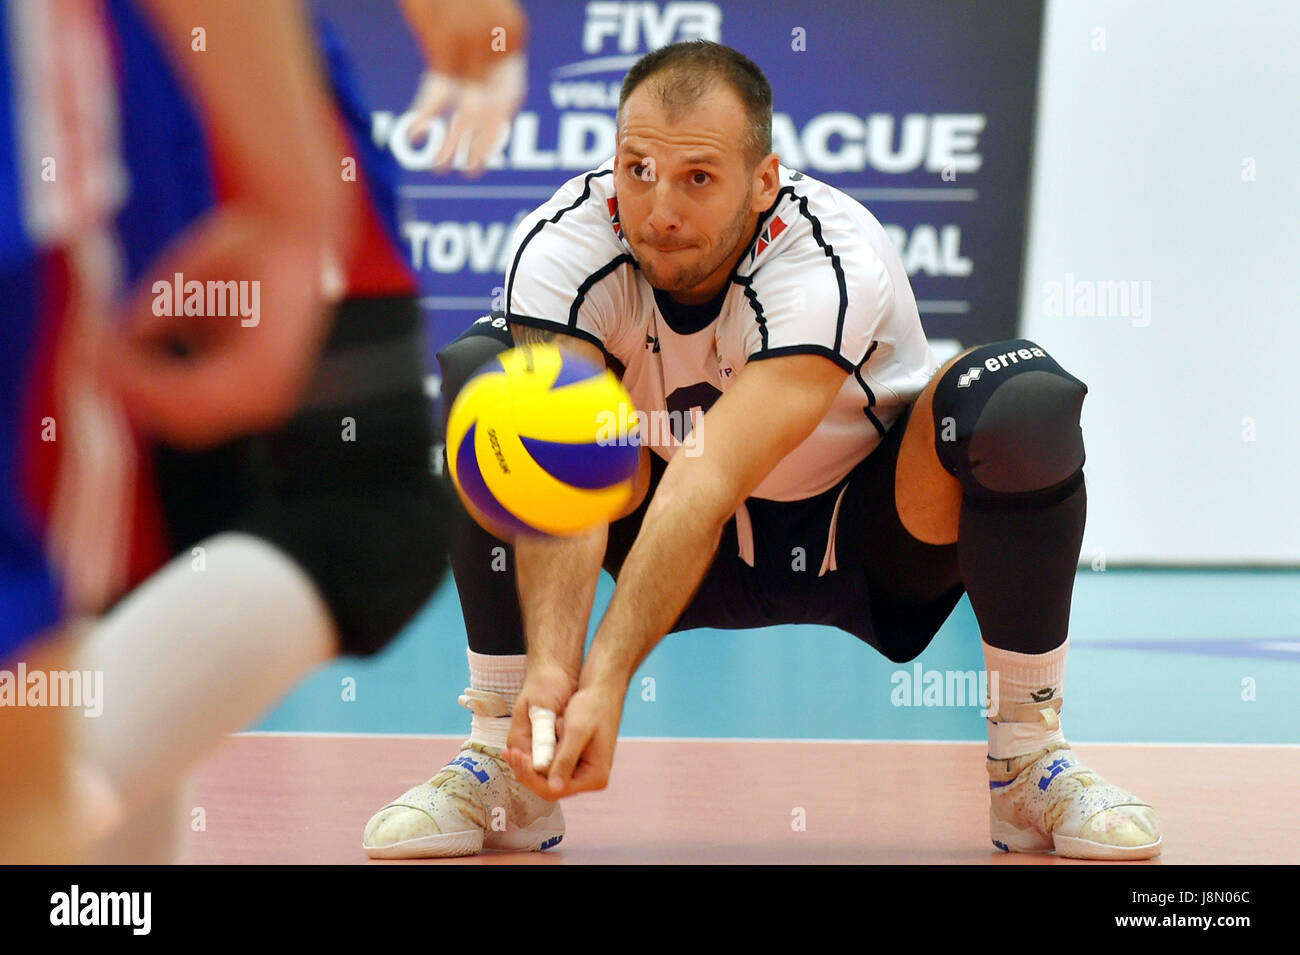 Vladimir Knezevic (CYP) in action during the volleyball World Cup Qualification match Czech Republic vs Cyprus in Karlovy Vary, Czech Republic, May 27, 2017. (CTK Photo/Slavomir Kubes) Stock Photo